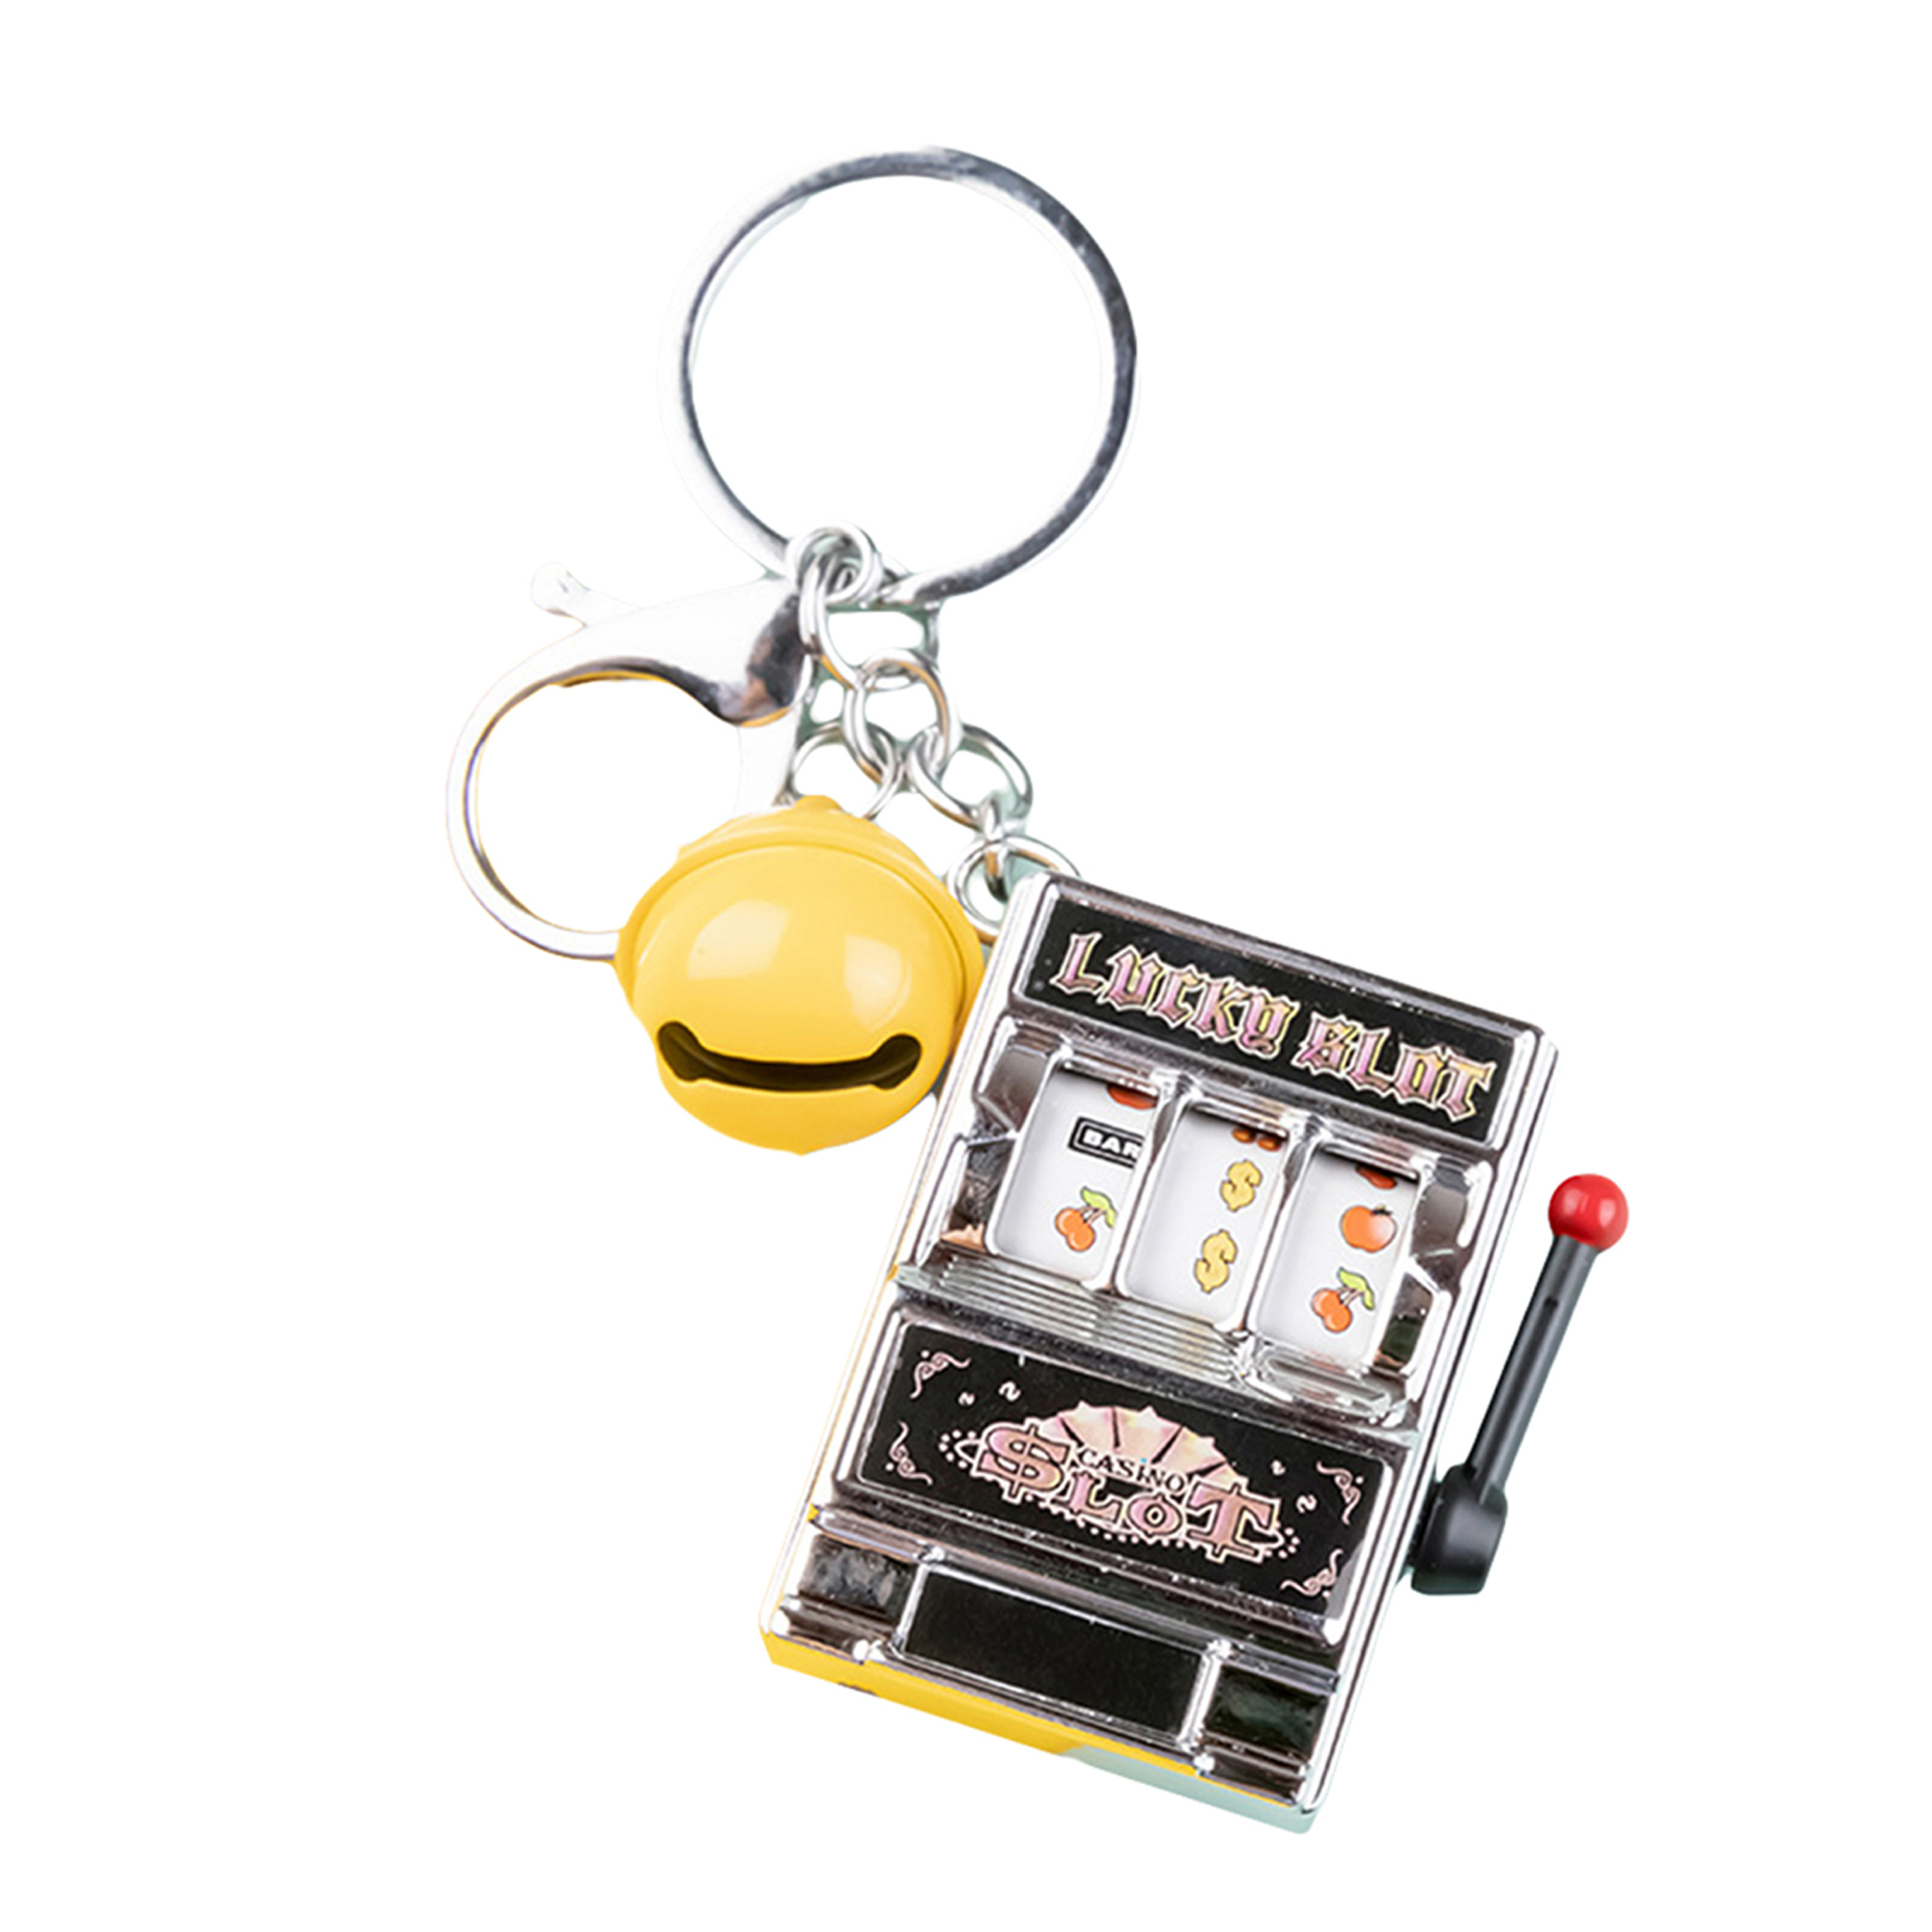 Fruit slot machine keychain with a yellow bell attached to it